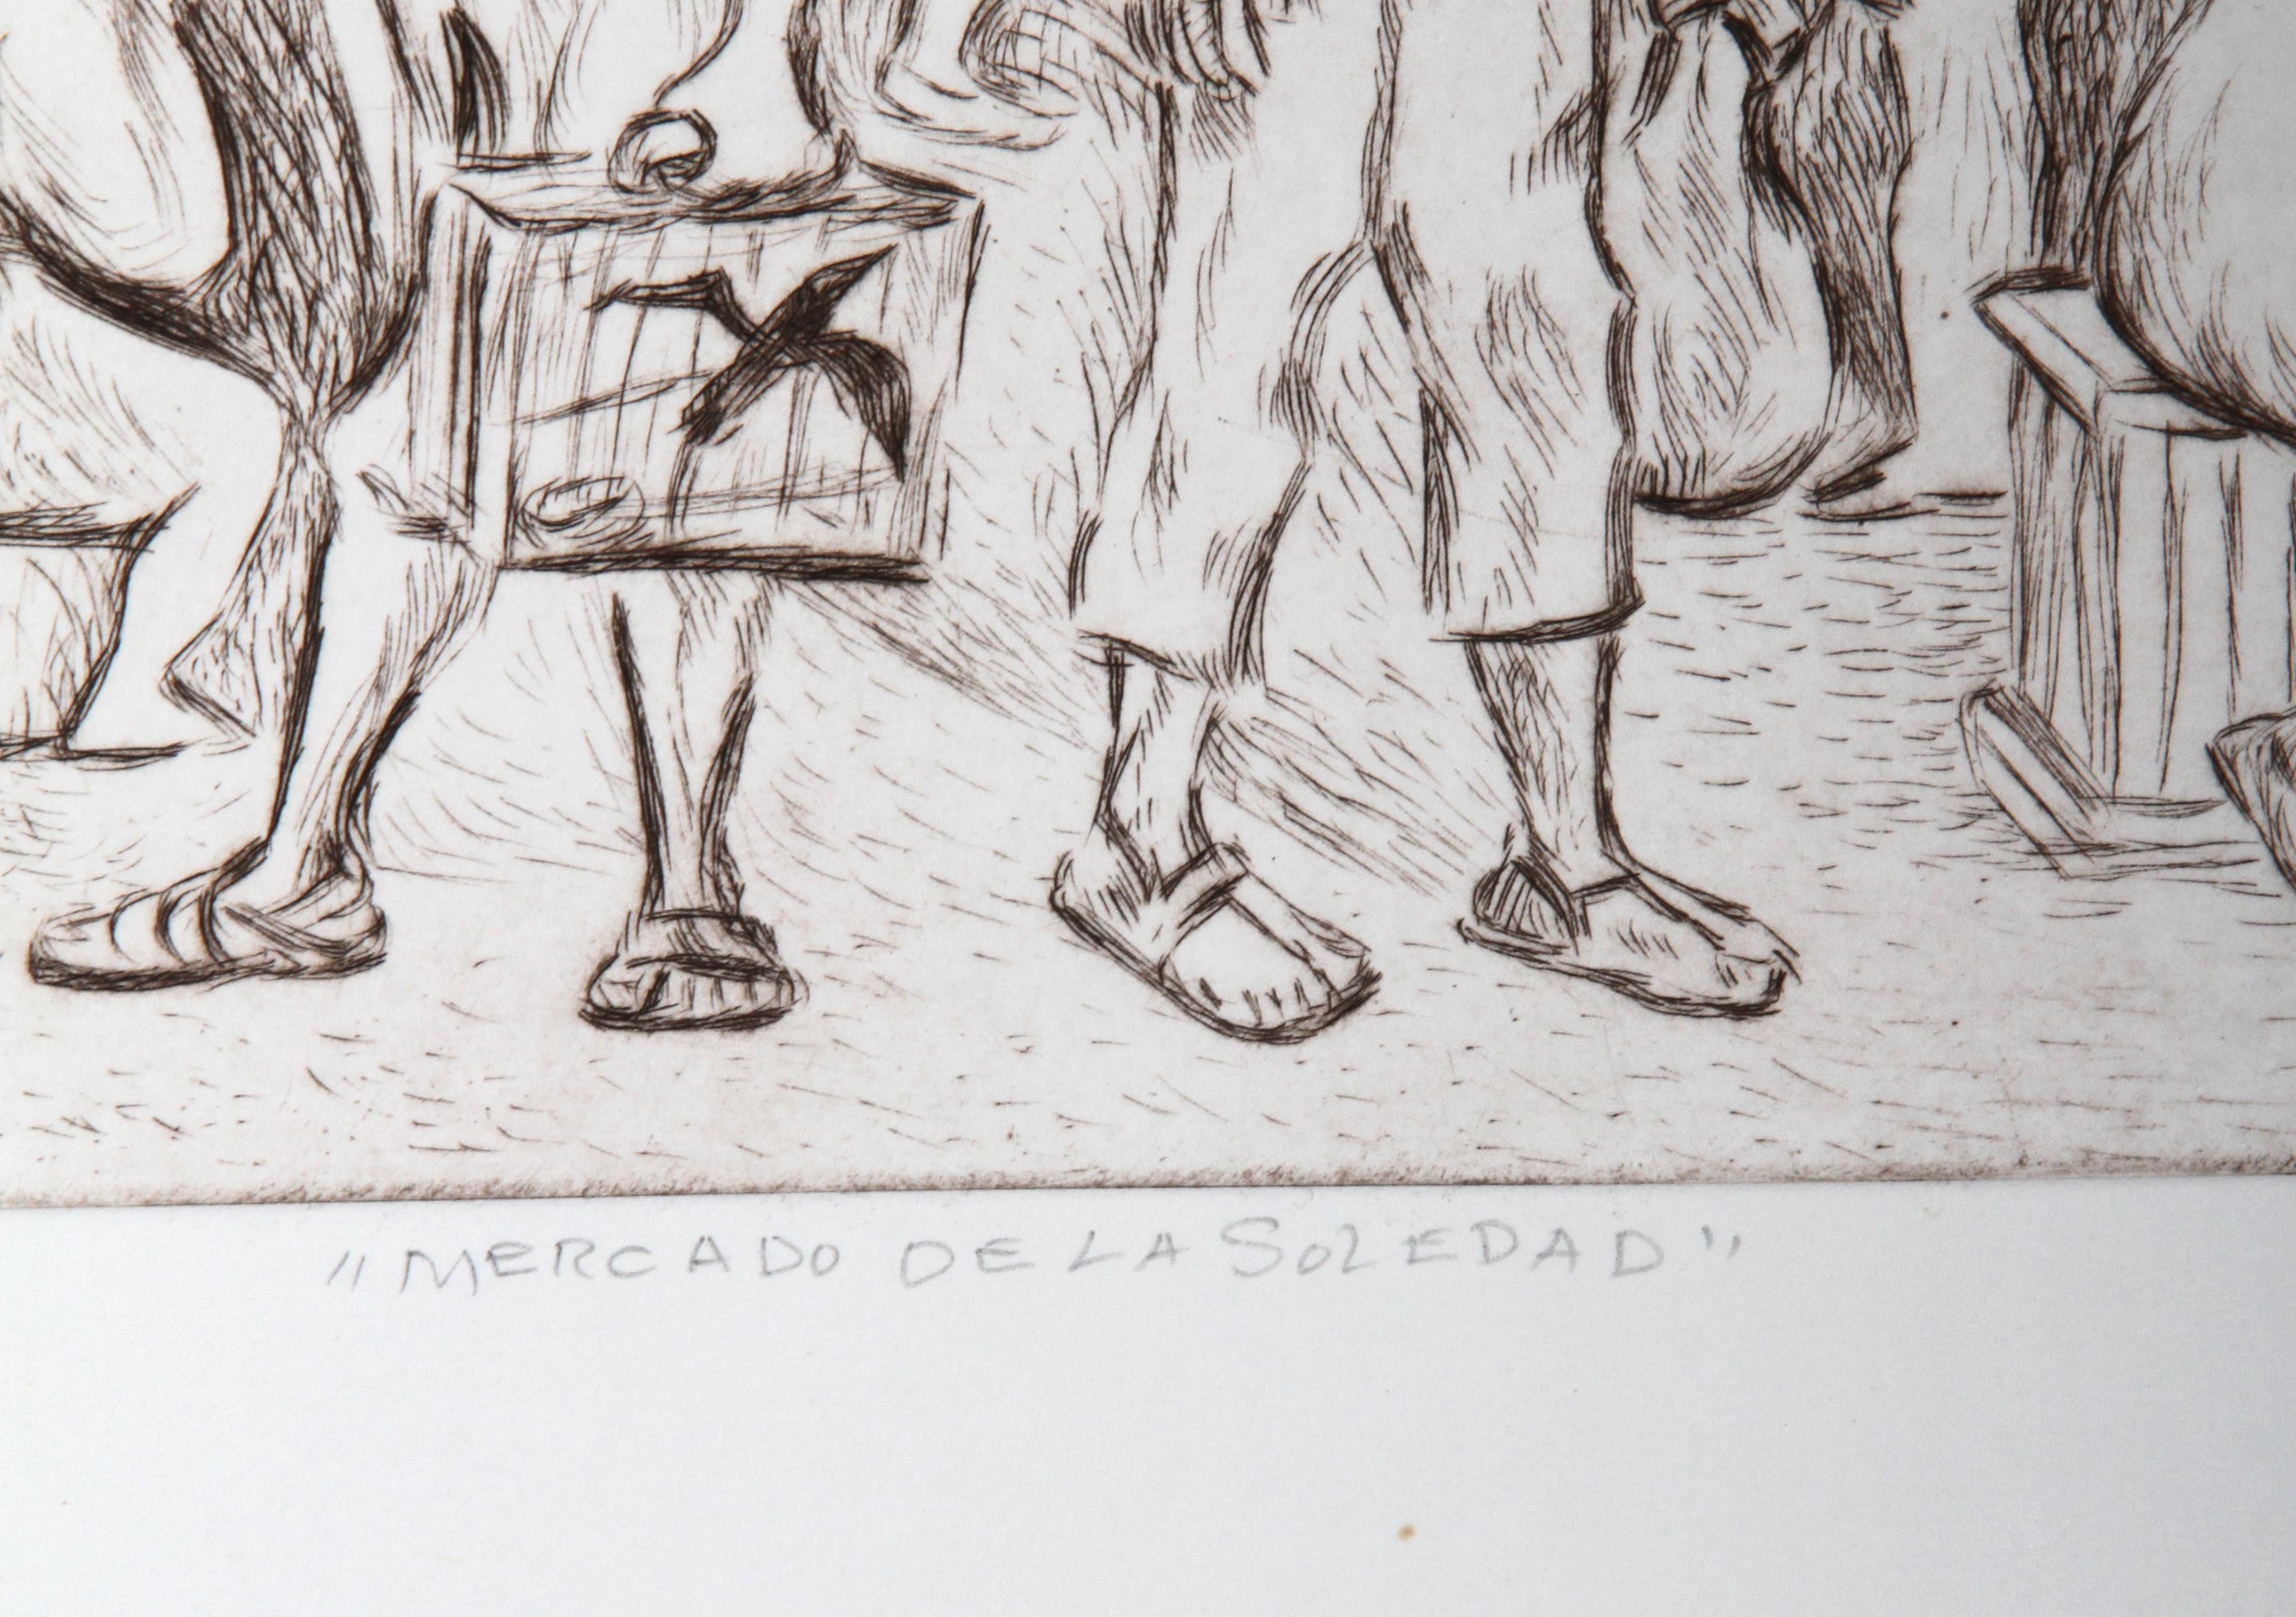 Artist: Alfredo Zalce, Mexican (1908 - 2003)
Title: Mercado de la Soledad
Year: 1990
Medium: Etching, signed and numbered in pencil
Edition: 100
Image Size: 8.25 x 25 inches
Size: 16 x 32 in. (40.64 x 81.28 cm)